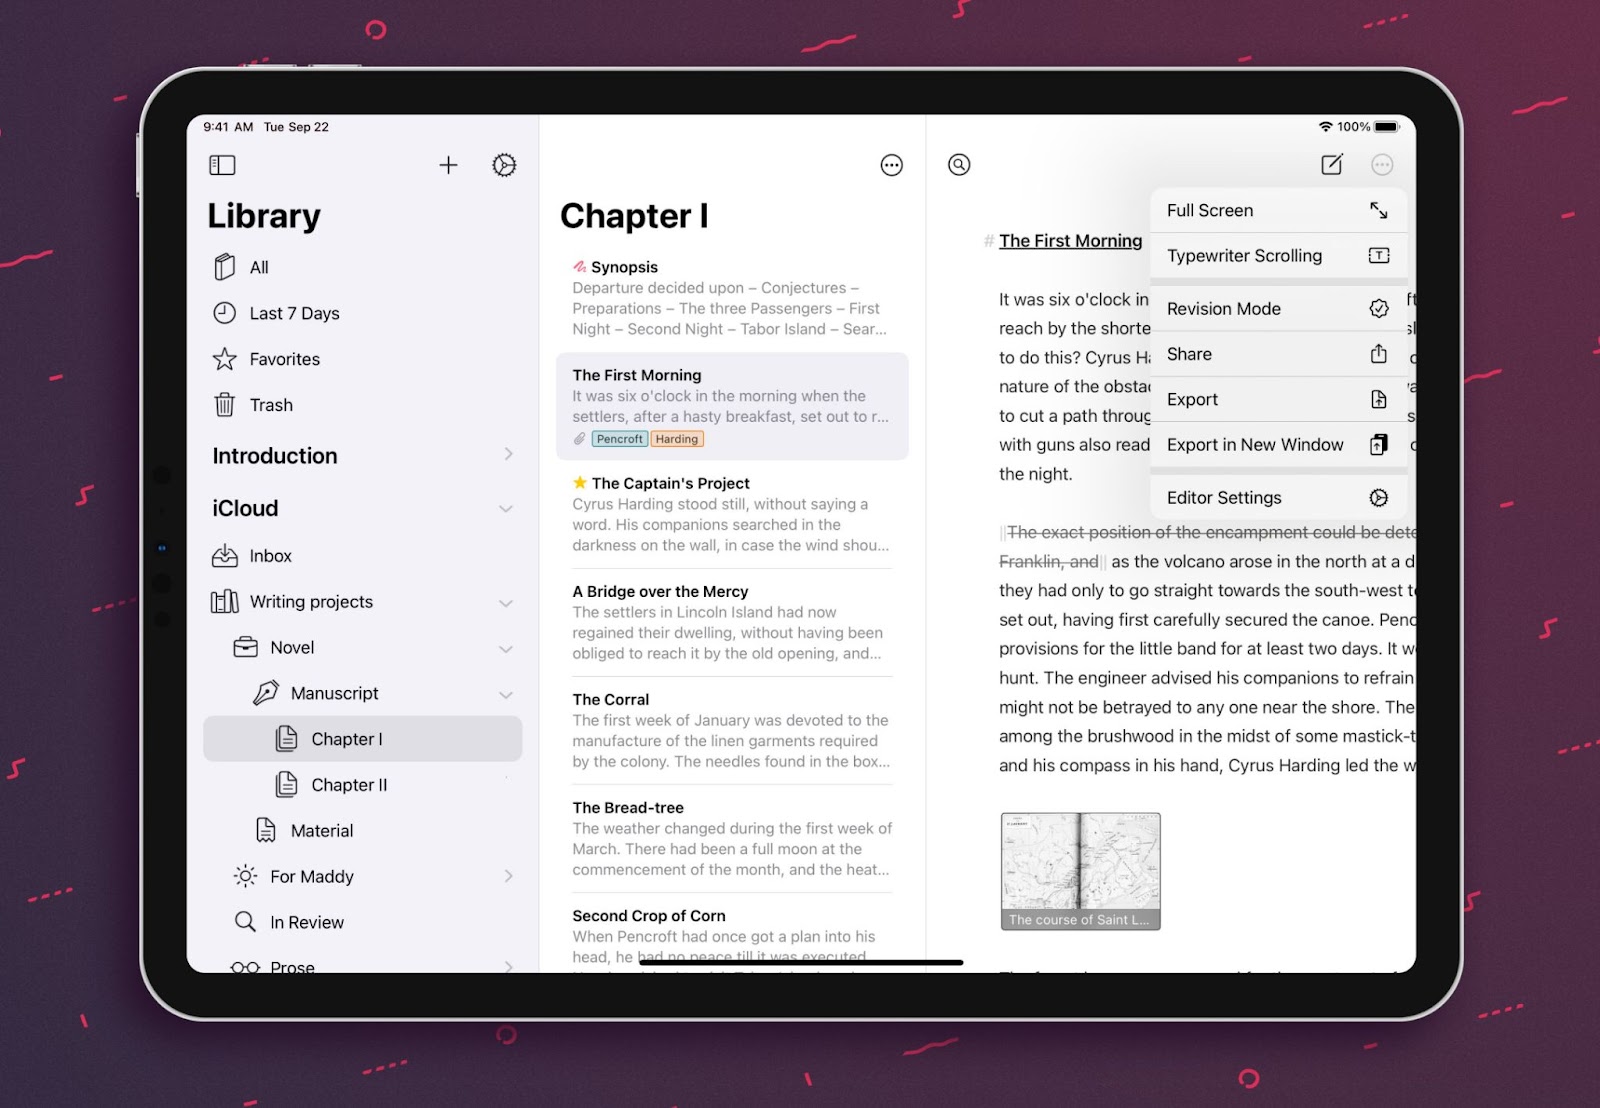 Ulysses is compatible with most Apple devices and ensures you always use the correct grammar